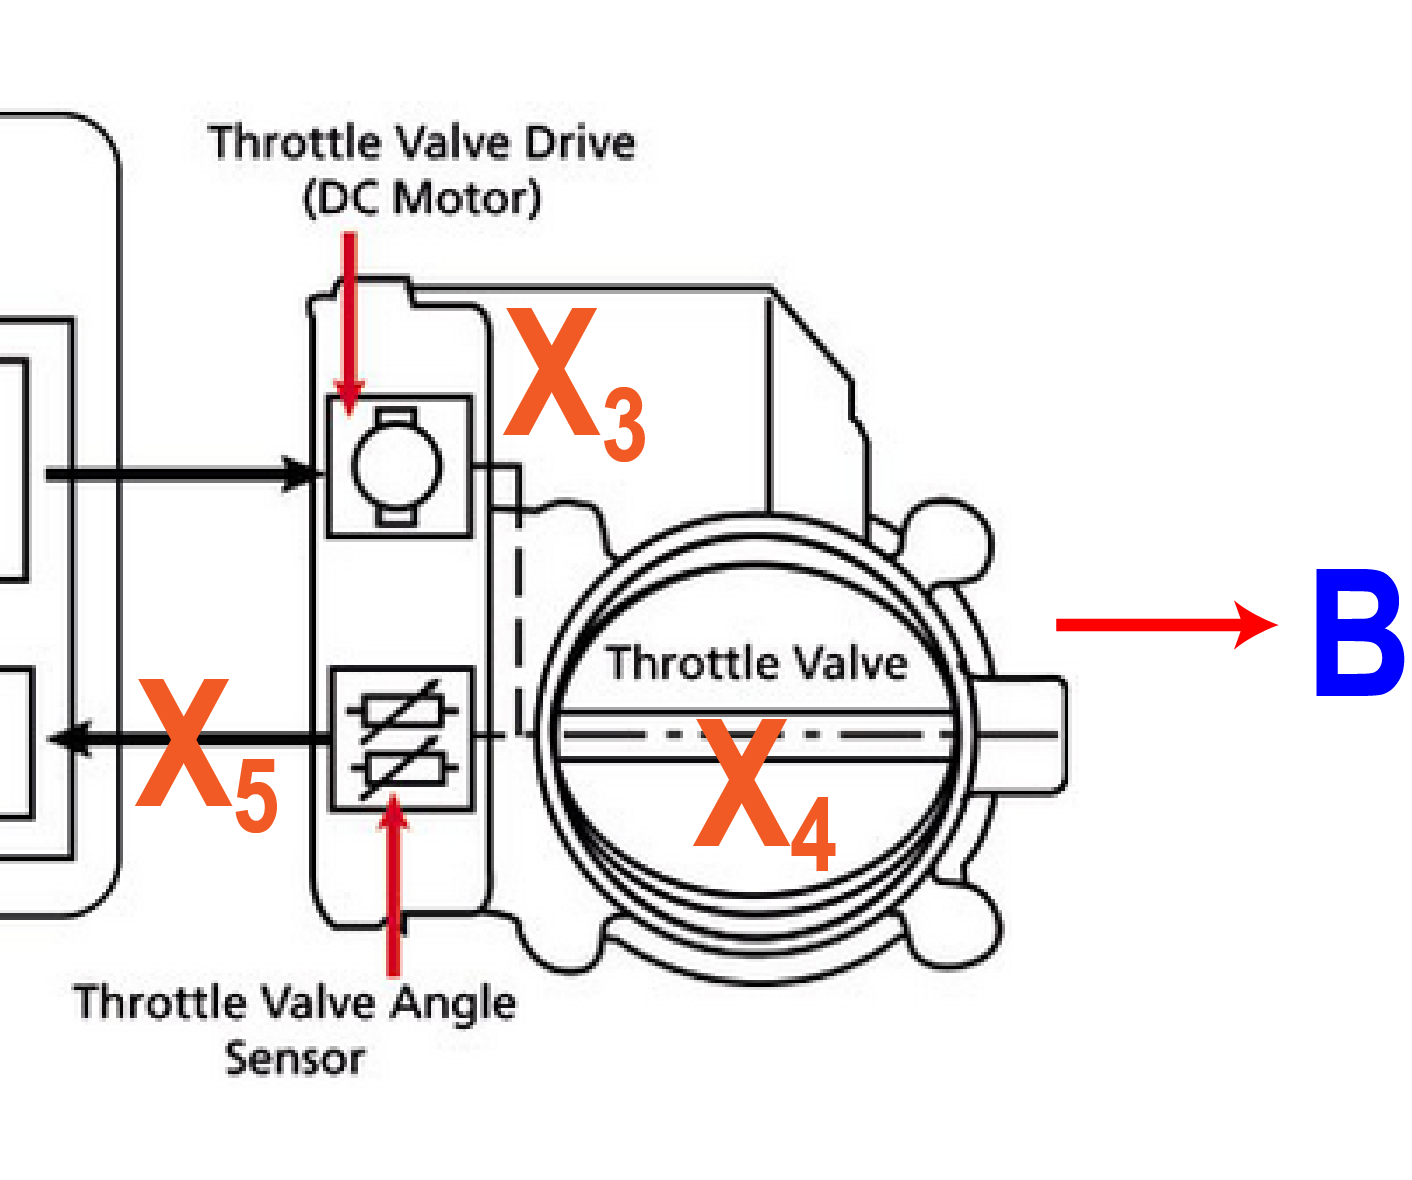 Closeup of the throttle schematic, adding a new component X5, the throttle valve sensor. This demonstrates a fork configuration.